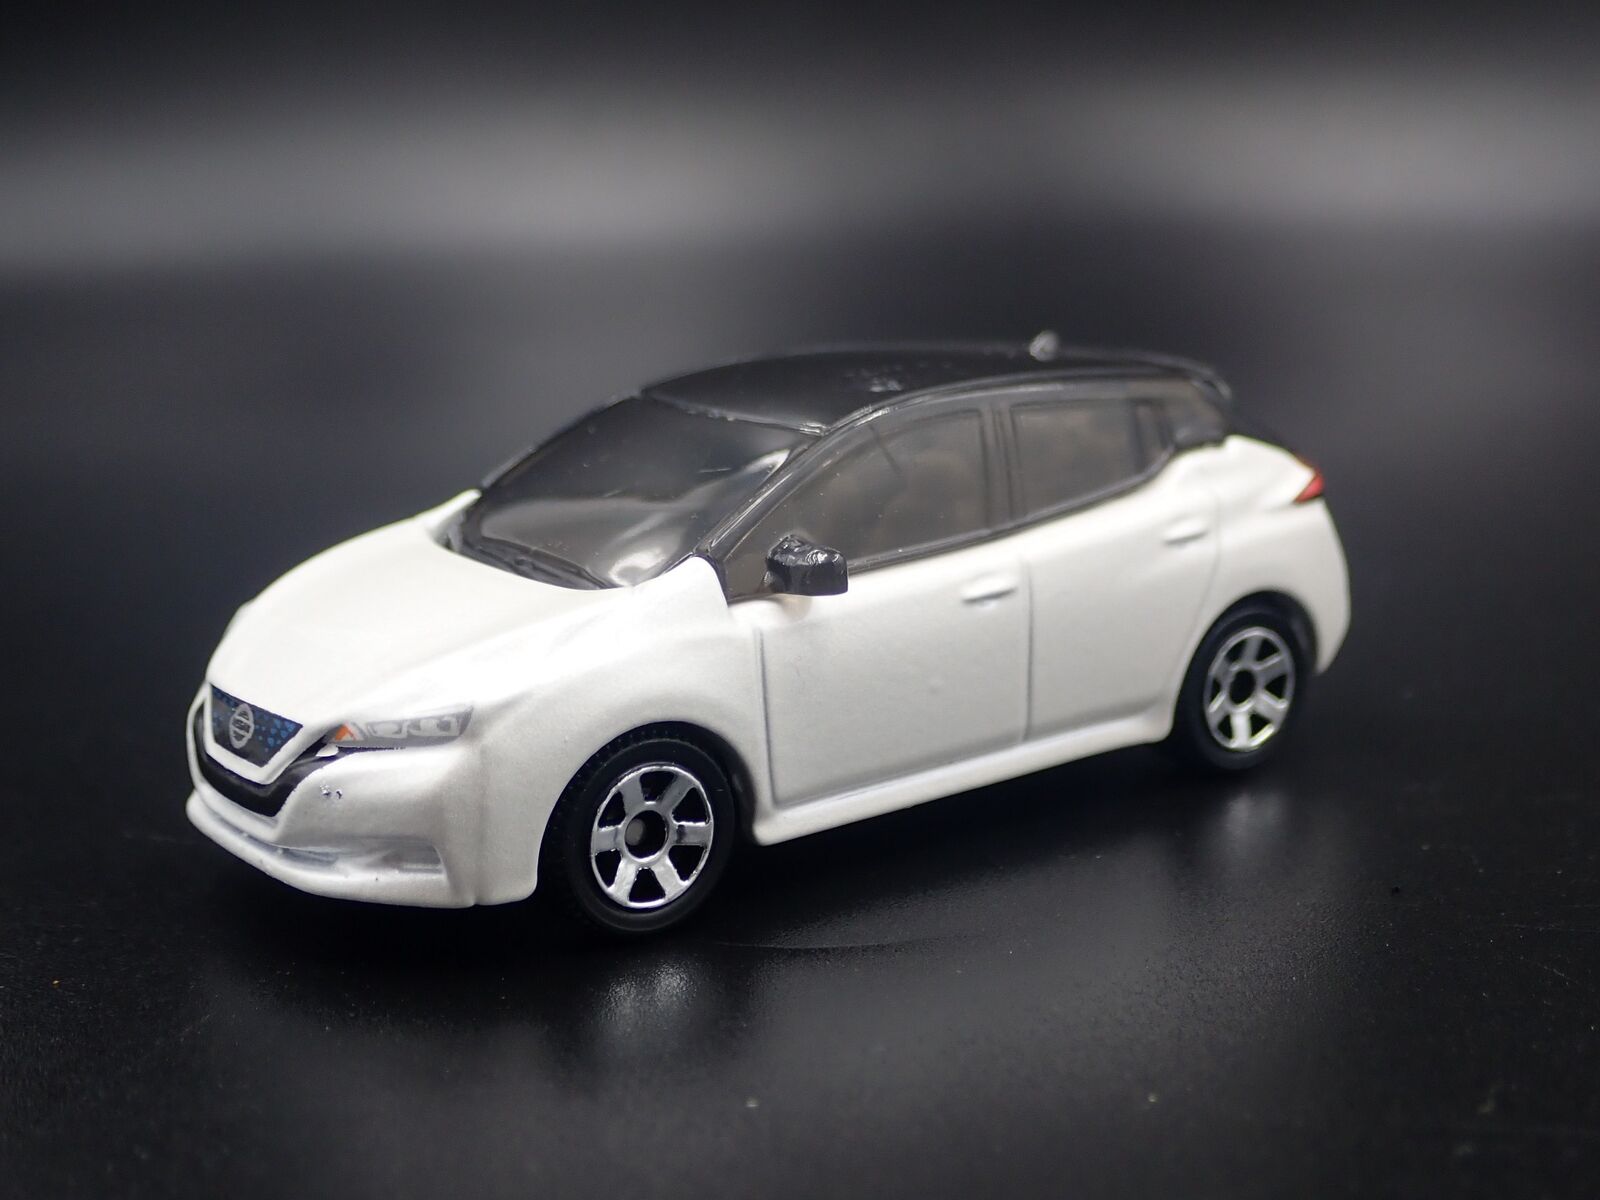 2017-2020 NISSAN LEAF RARE 1:64 SCALE COLLECTIBLE DIORAMA DIECAST MODEL CAR